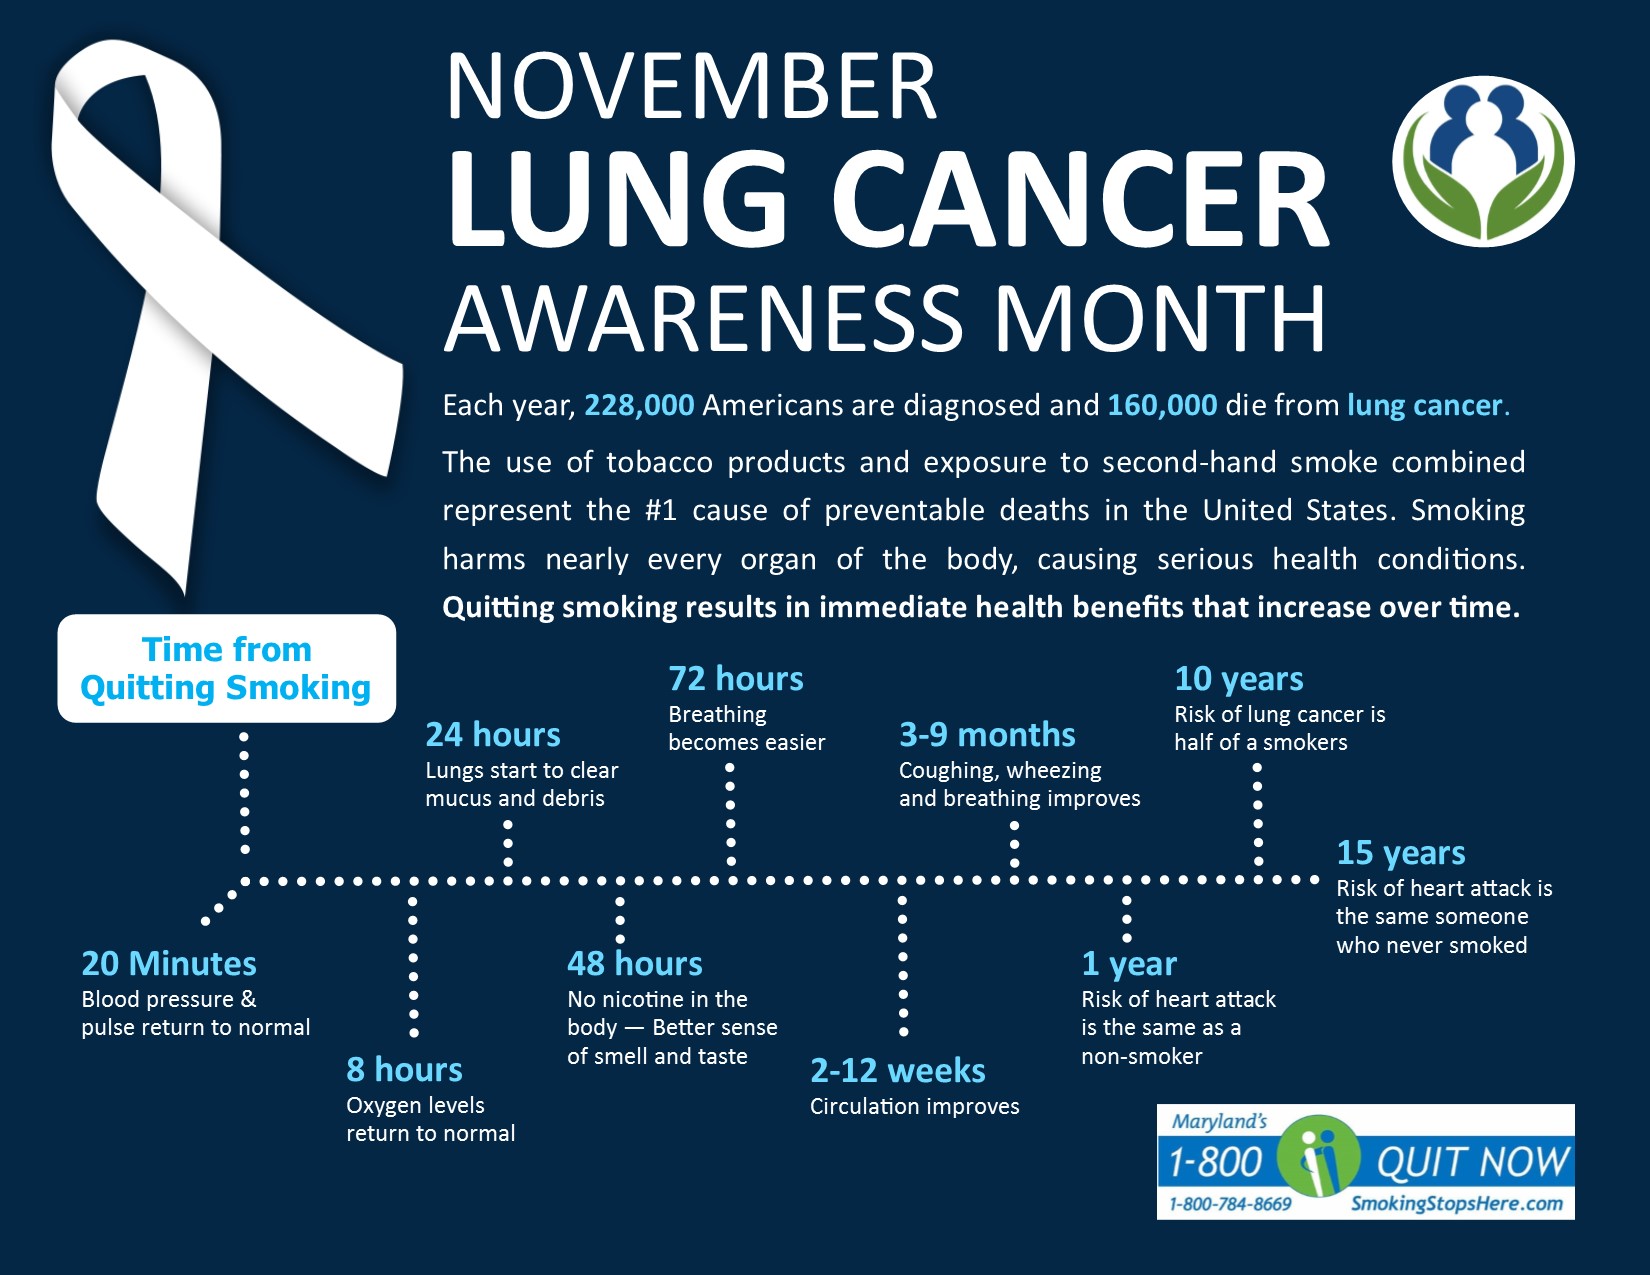 Lung Cancer Awareness Month Quit smoking benefits timeline. For more information visit: https://tobaccofreelife.org/why-quit-smoking/benefits-quitting-smoking/ 